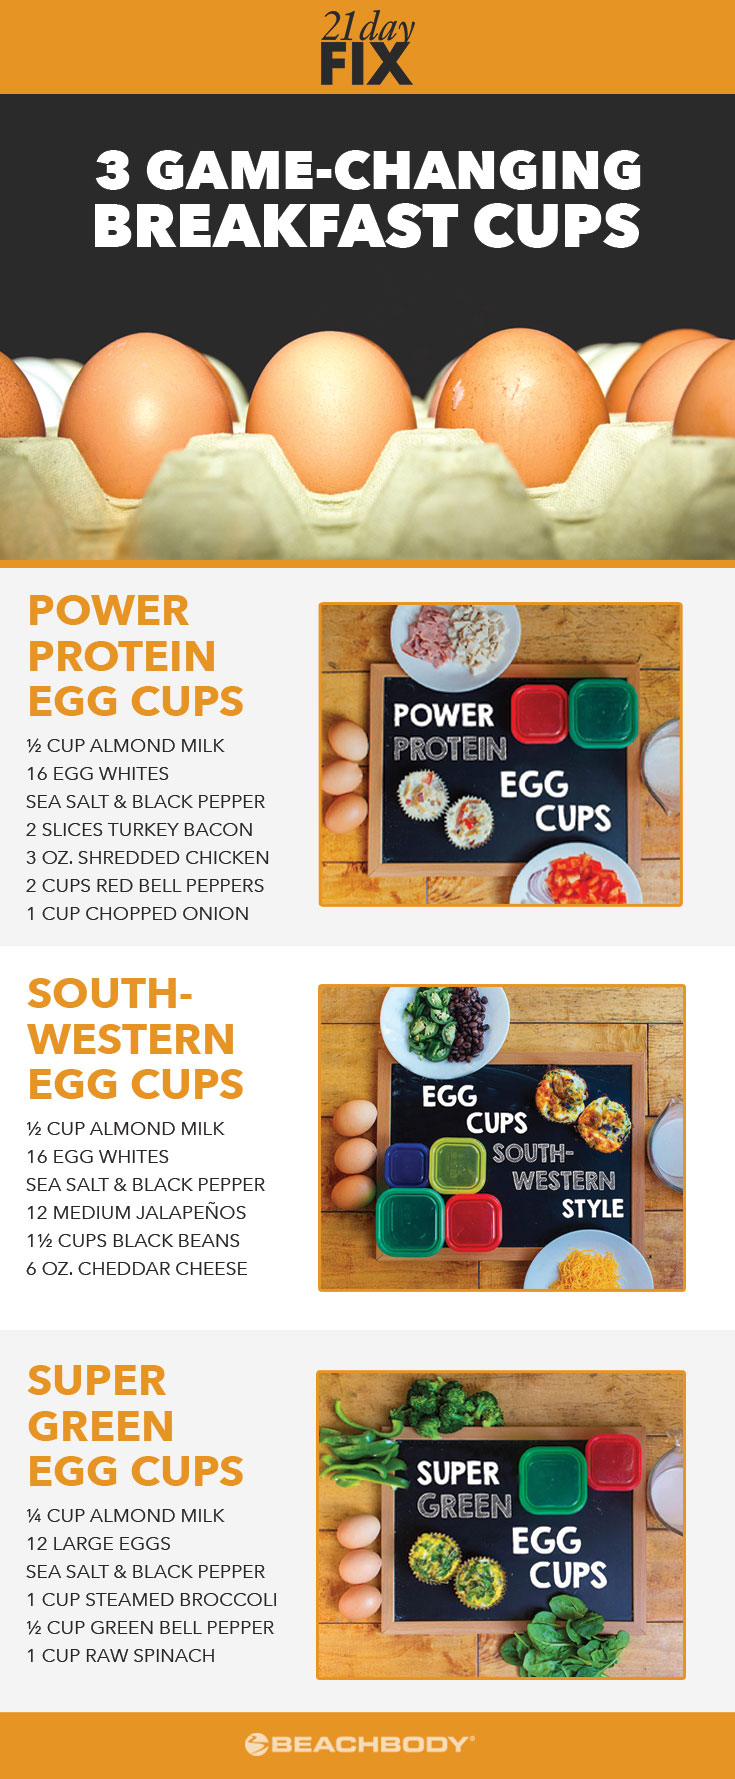 Mornings can be hectic. Whip up any of these easy breakfast (or lunch!) egg muffin recipes for 21-Day Fix-approved nutrition on-the-go!